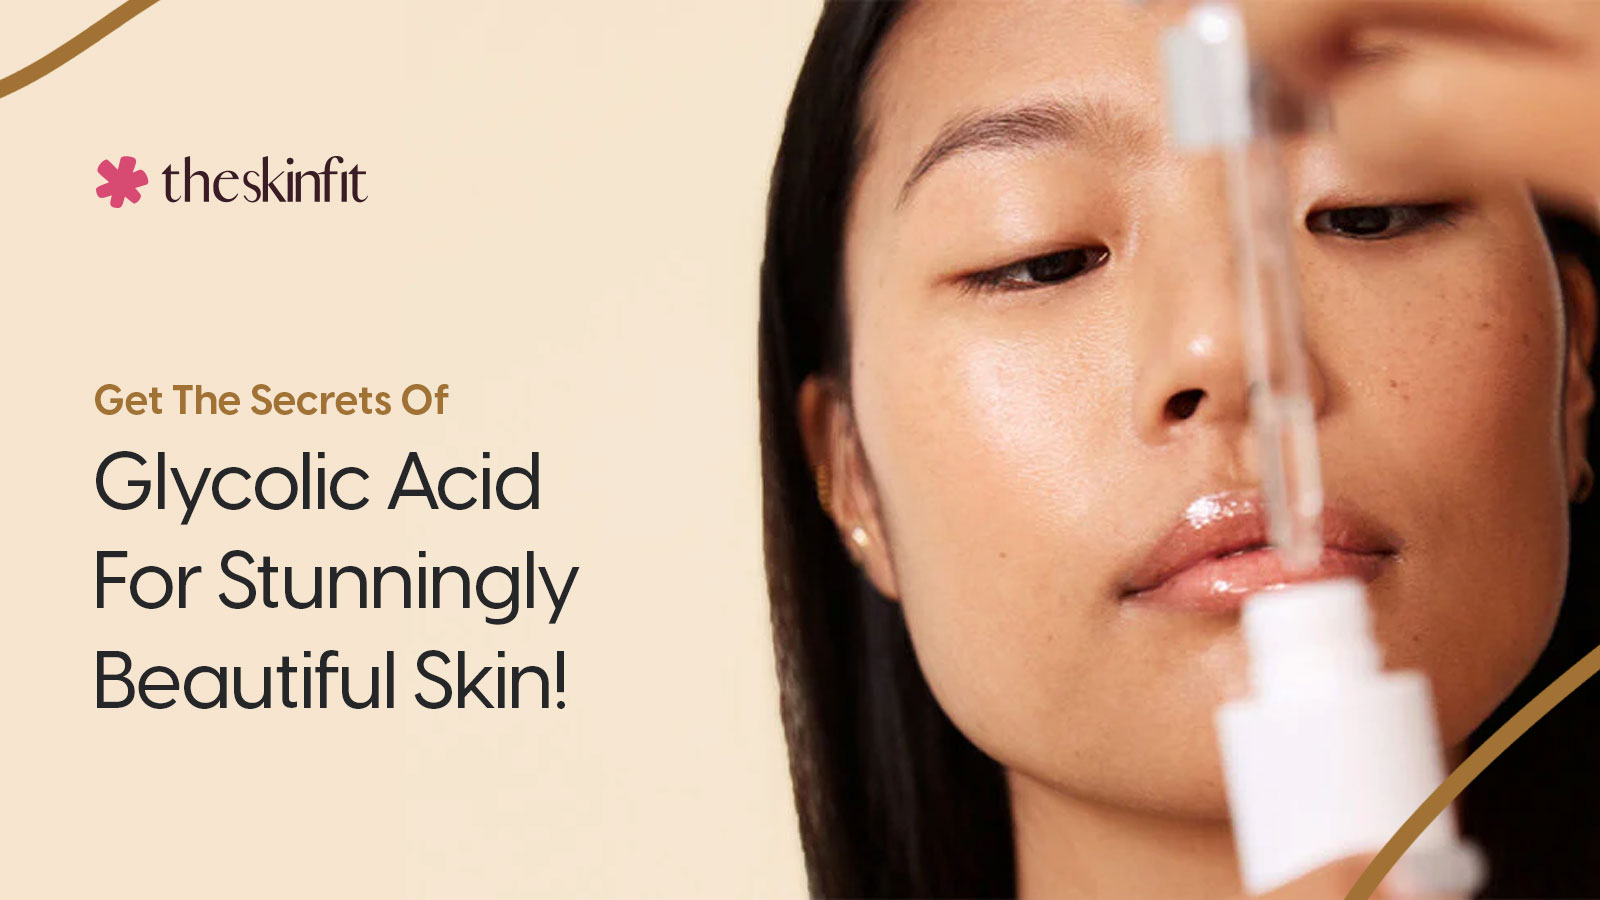 Get The Secrets Of Glycolic Acid For Stunningly Beautiful Skin!